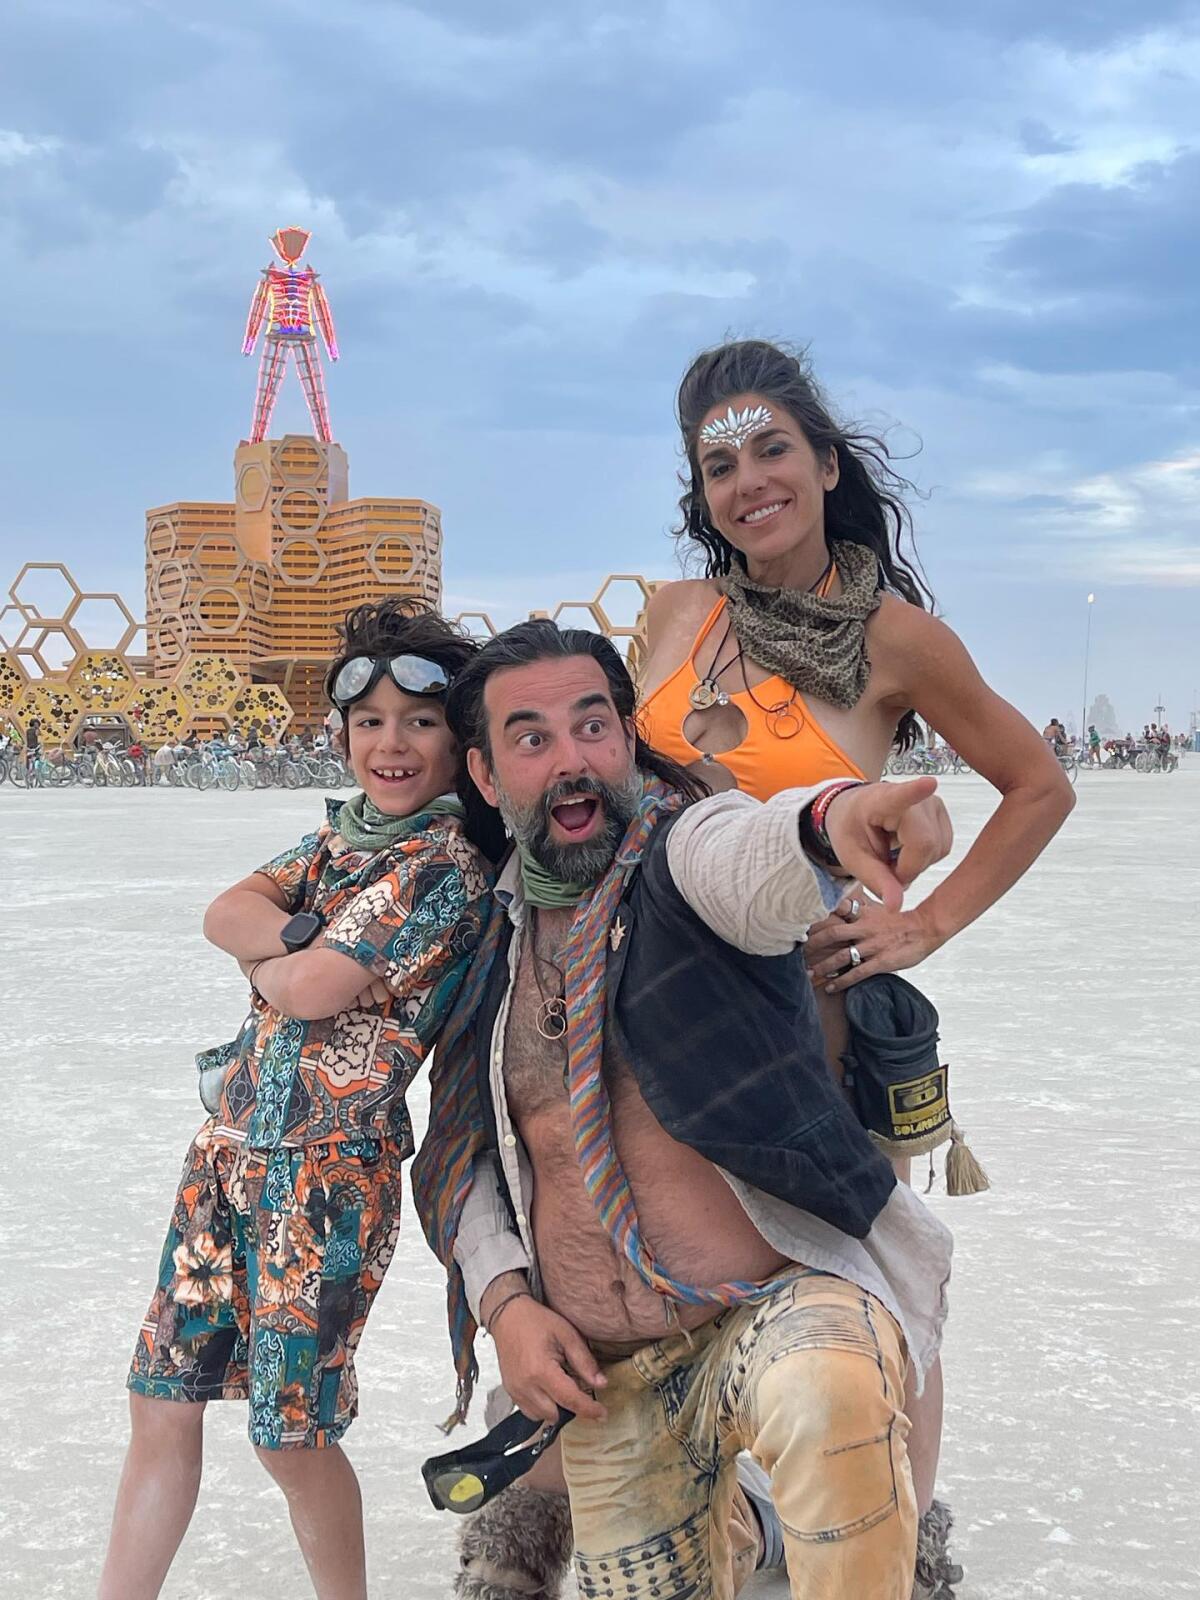 Bianca Snyder poses with her husband and son Tage while at Burning Man.